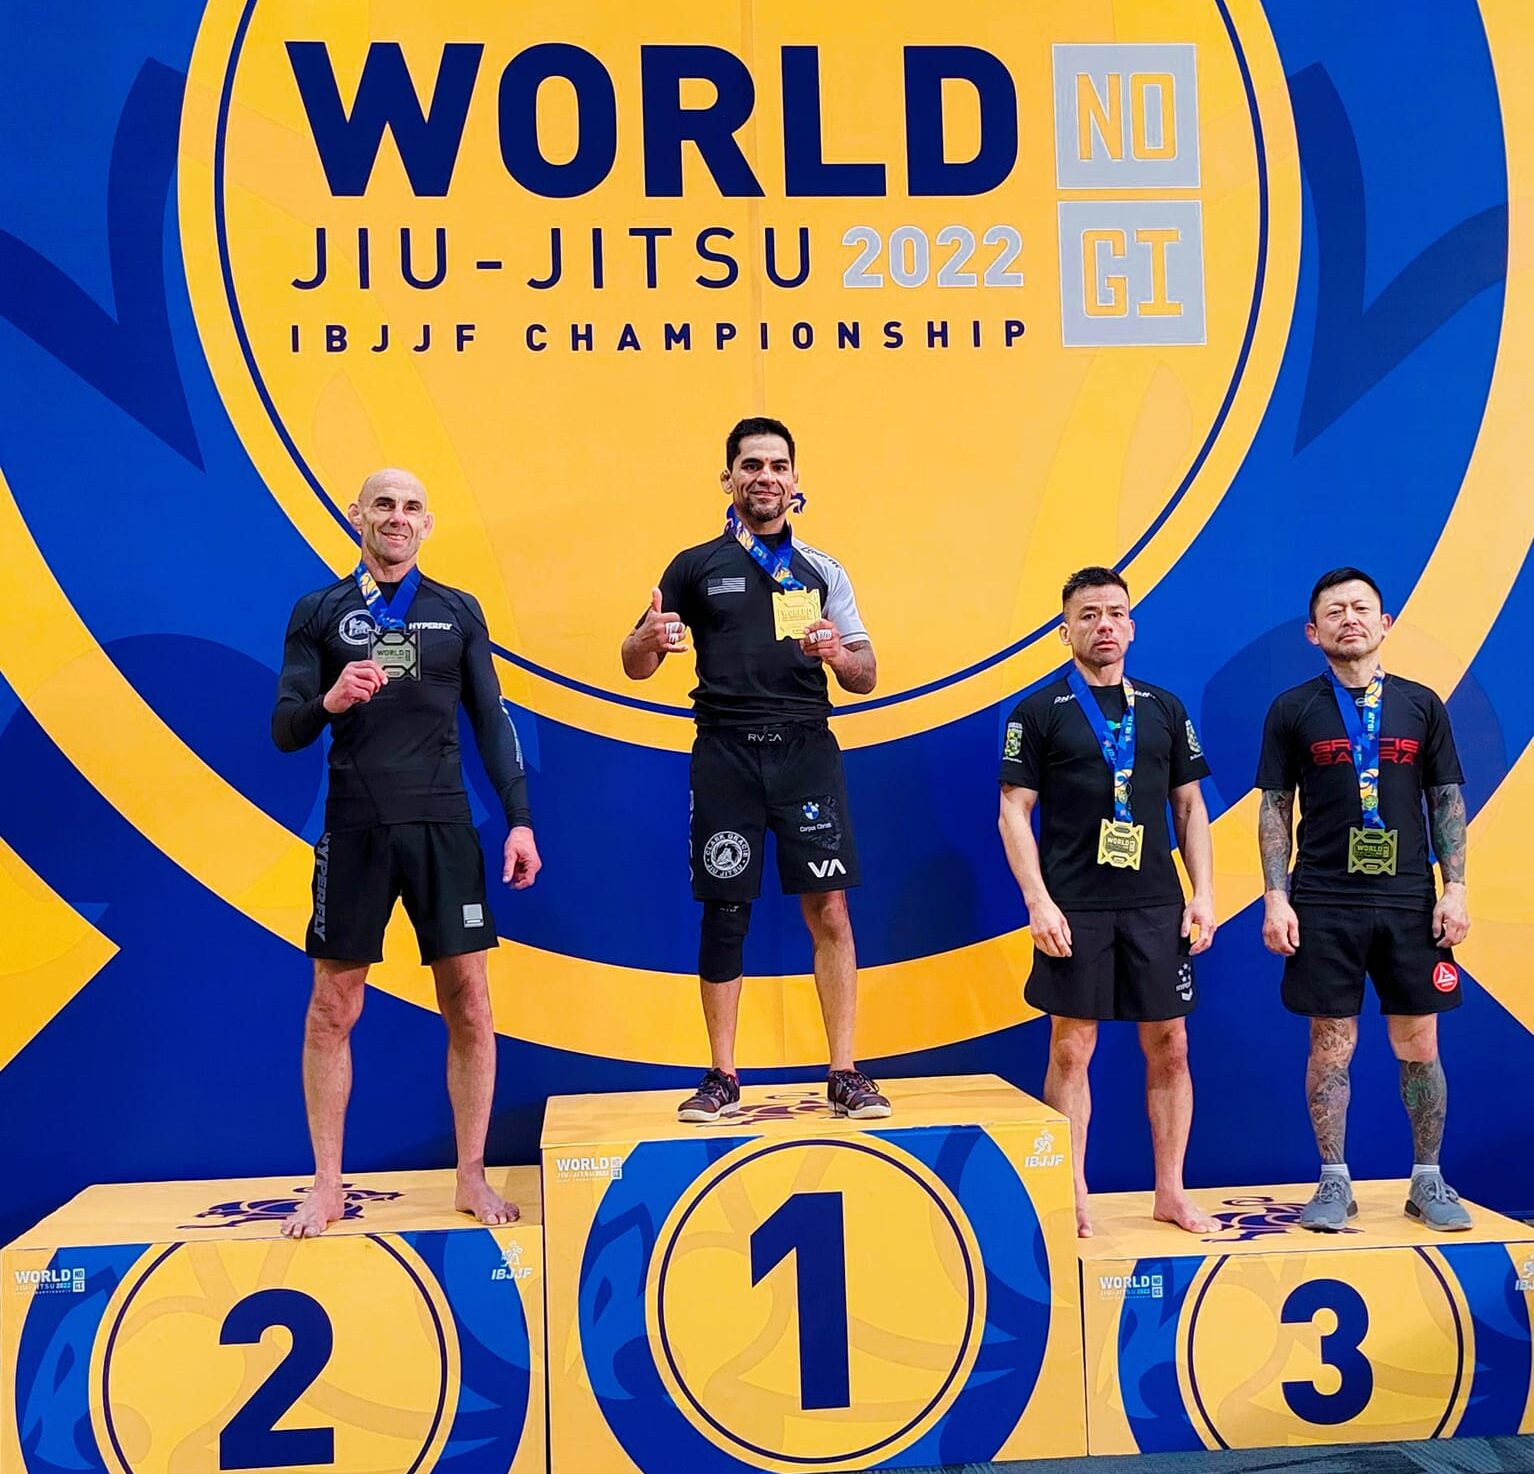 Train with multiple time and world bjj Champion.